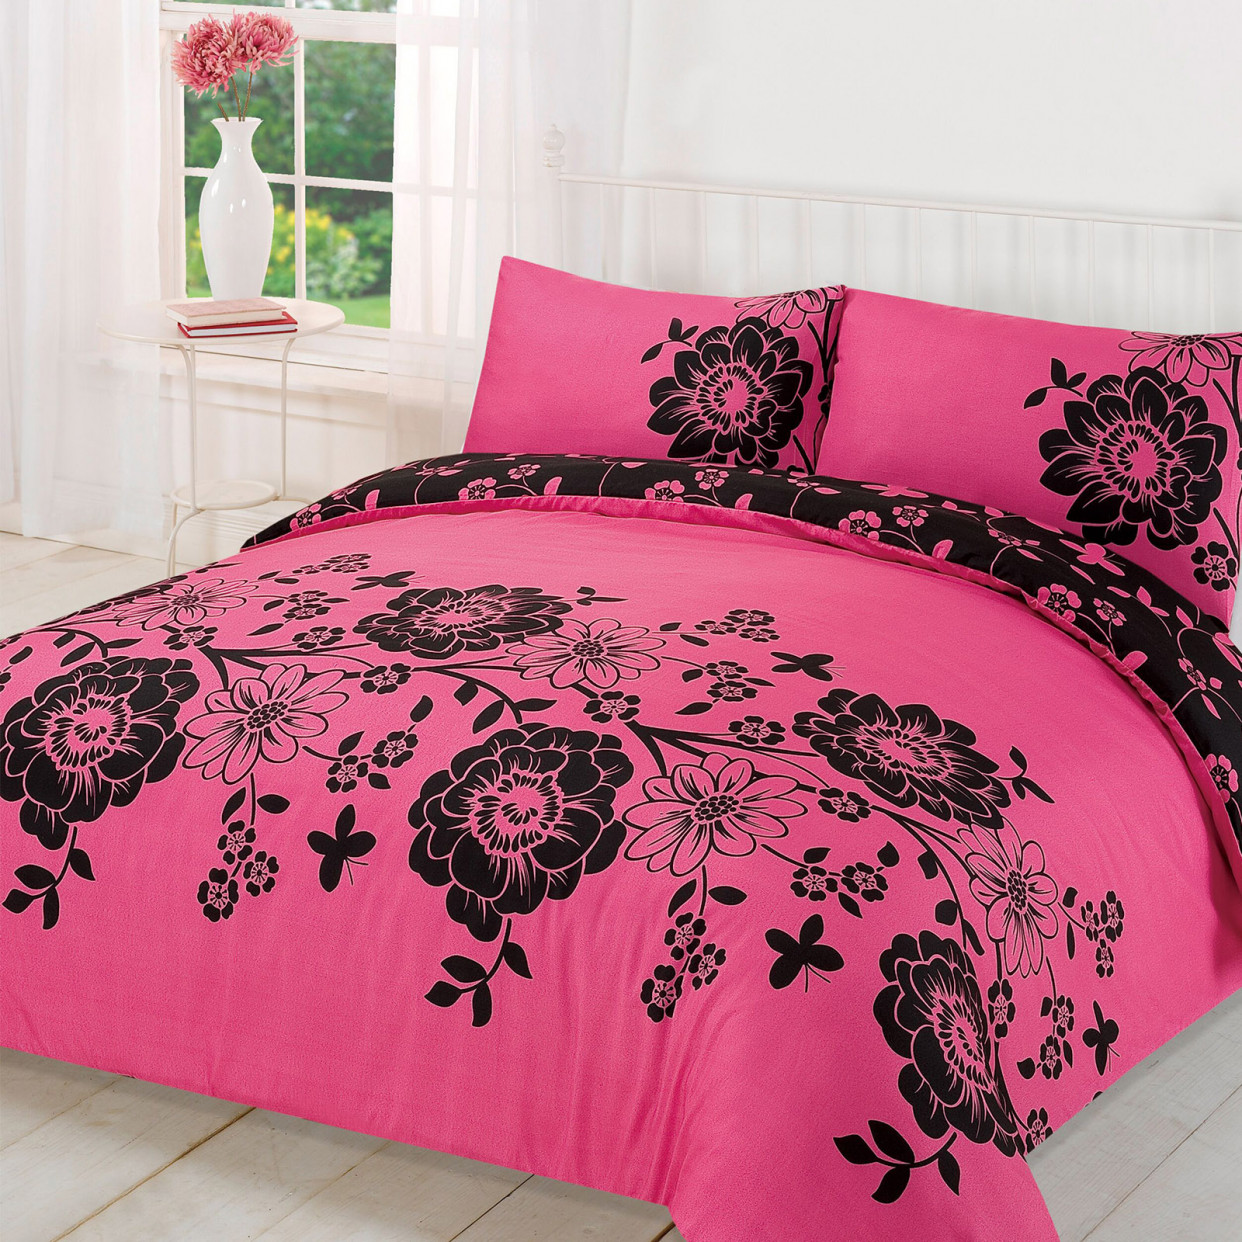 Roslyn Duvet Cover with pillowcase set - Pink/Black - Double >